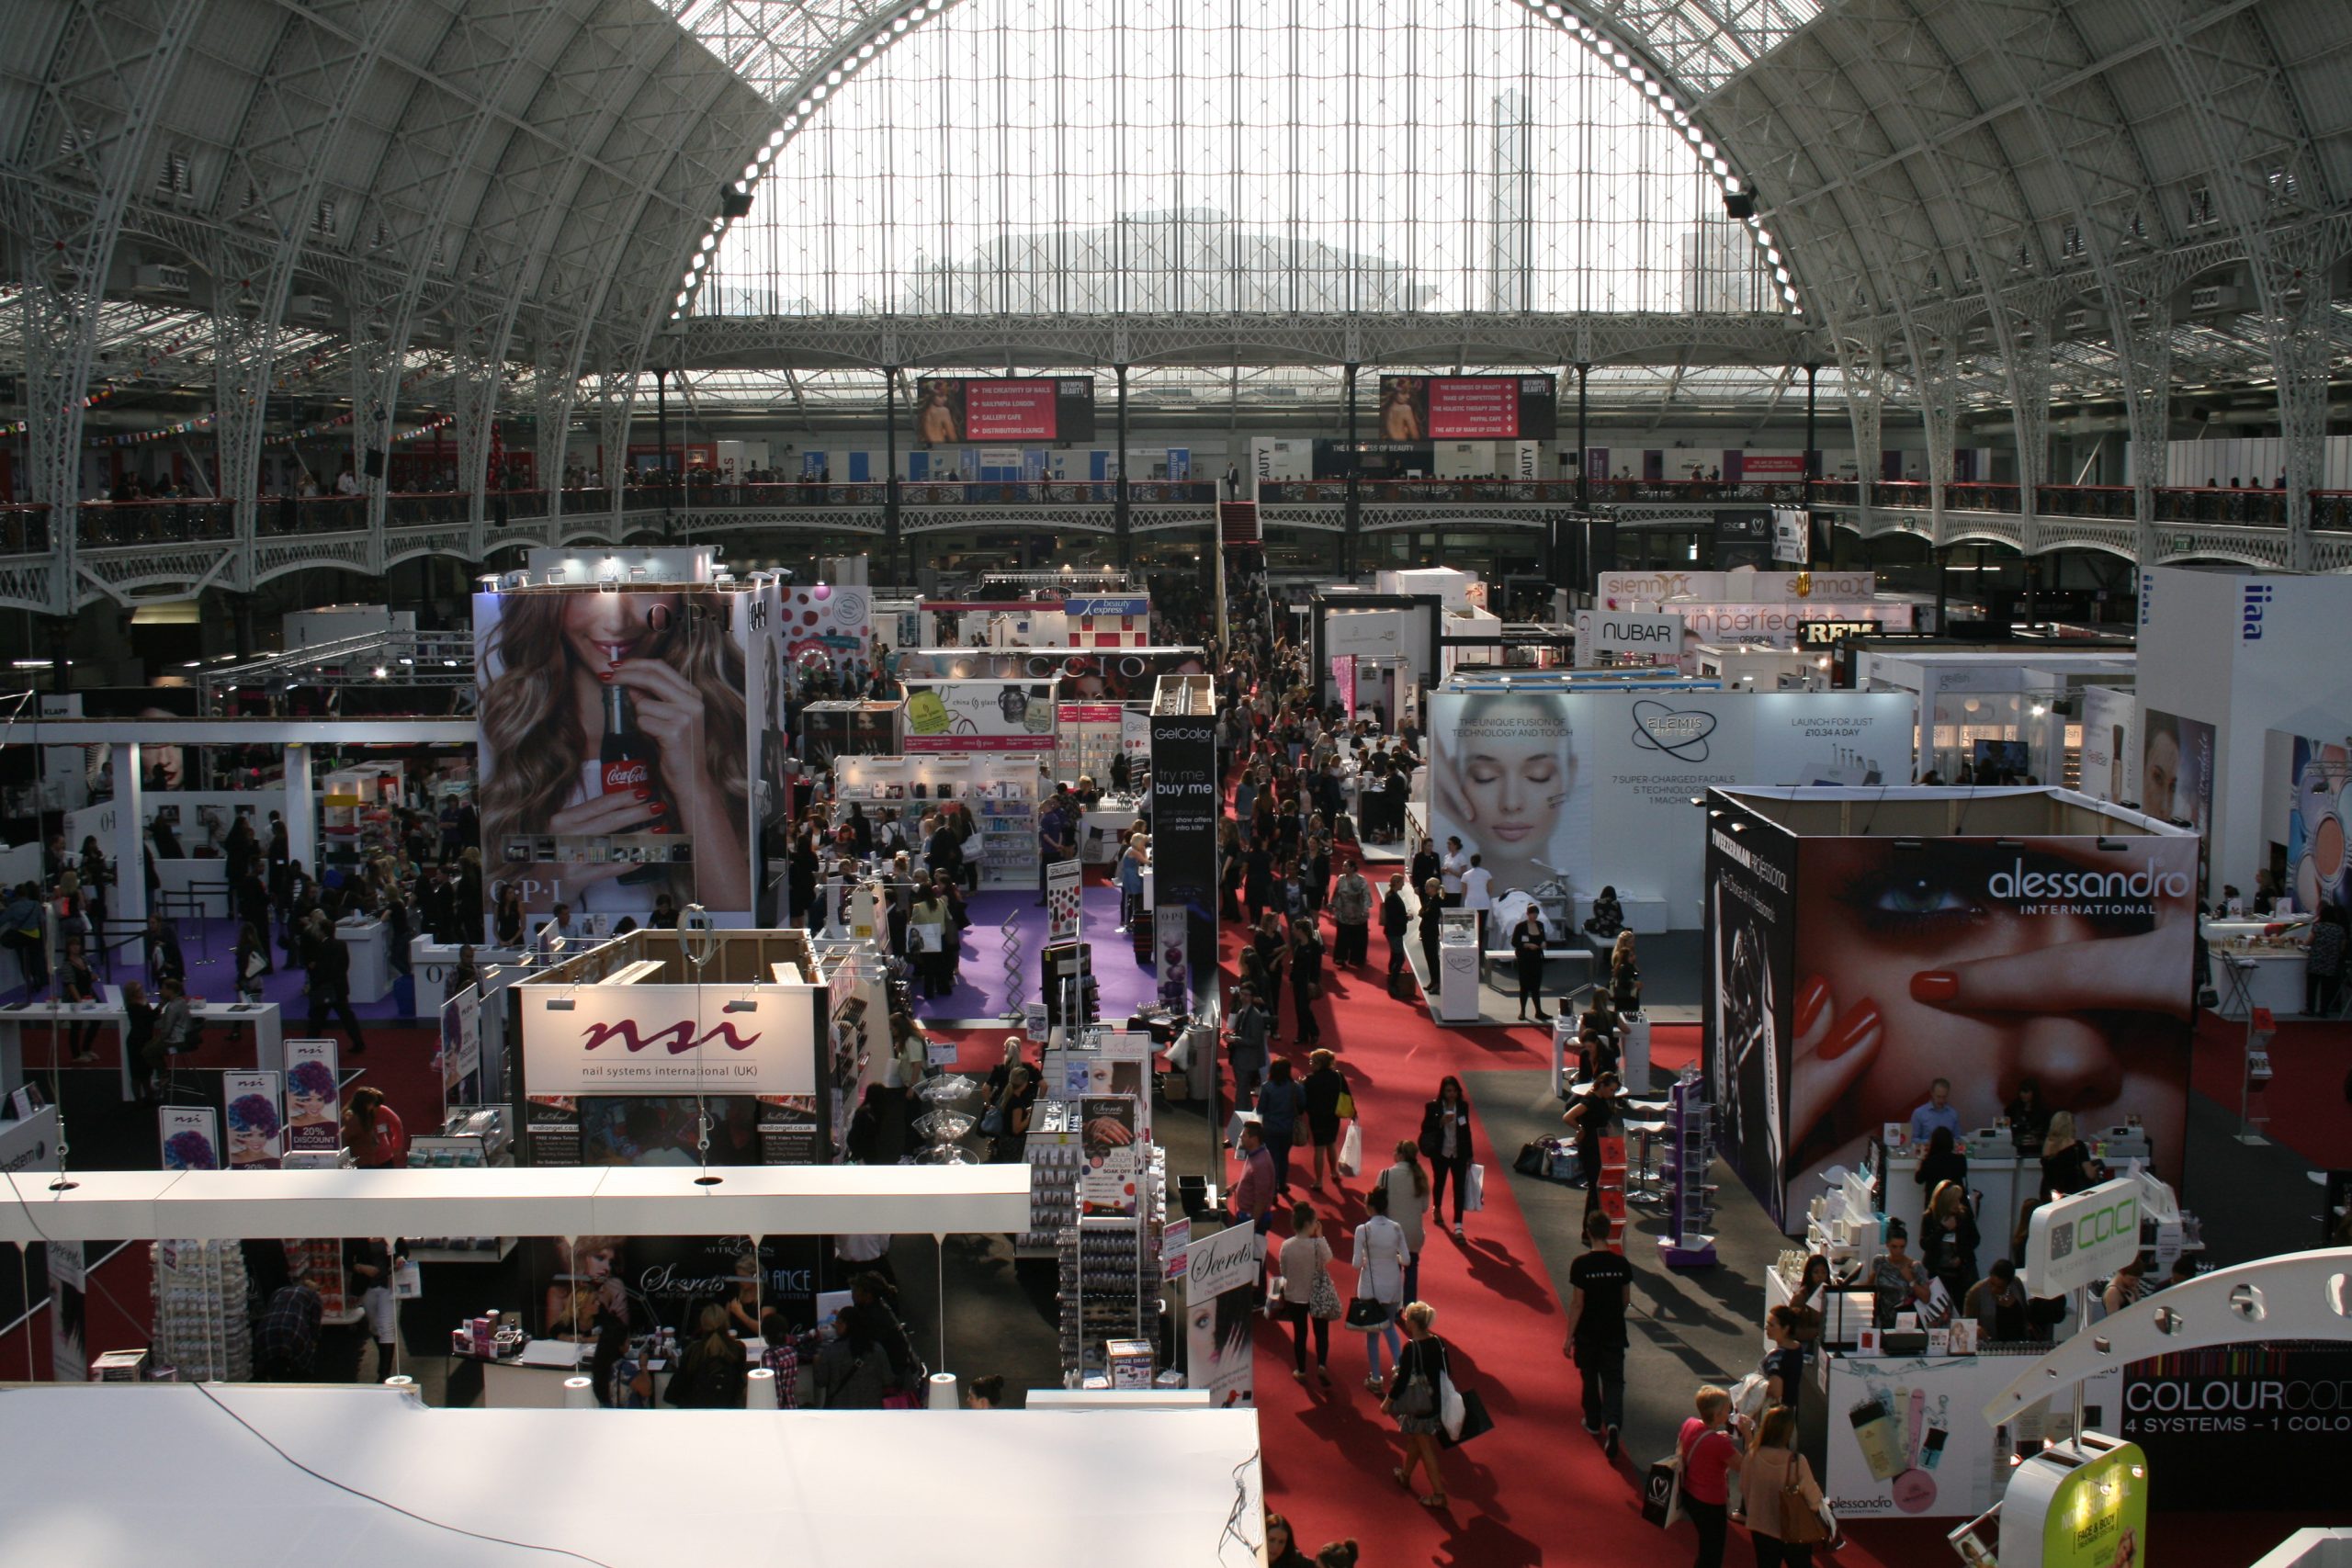 My Day at Olympia Beauty 2014 (picture heavy)